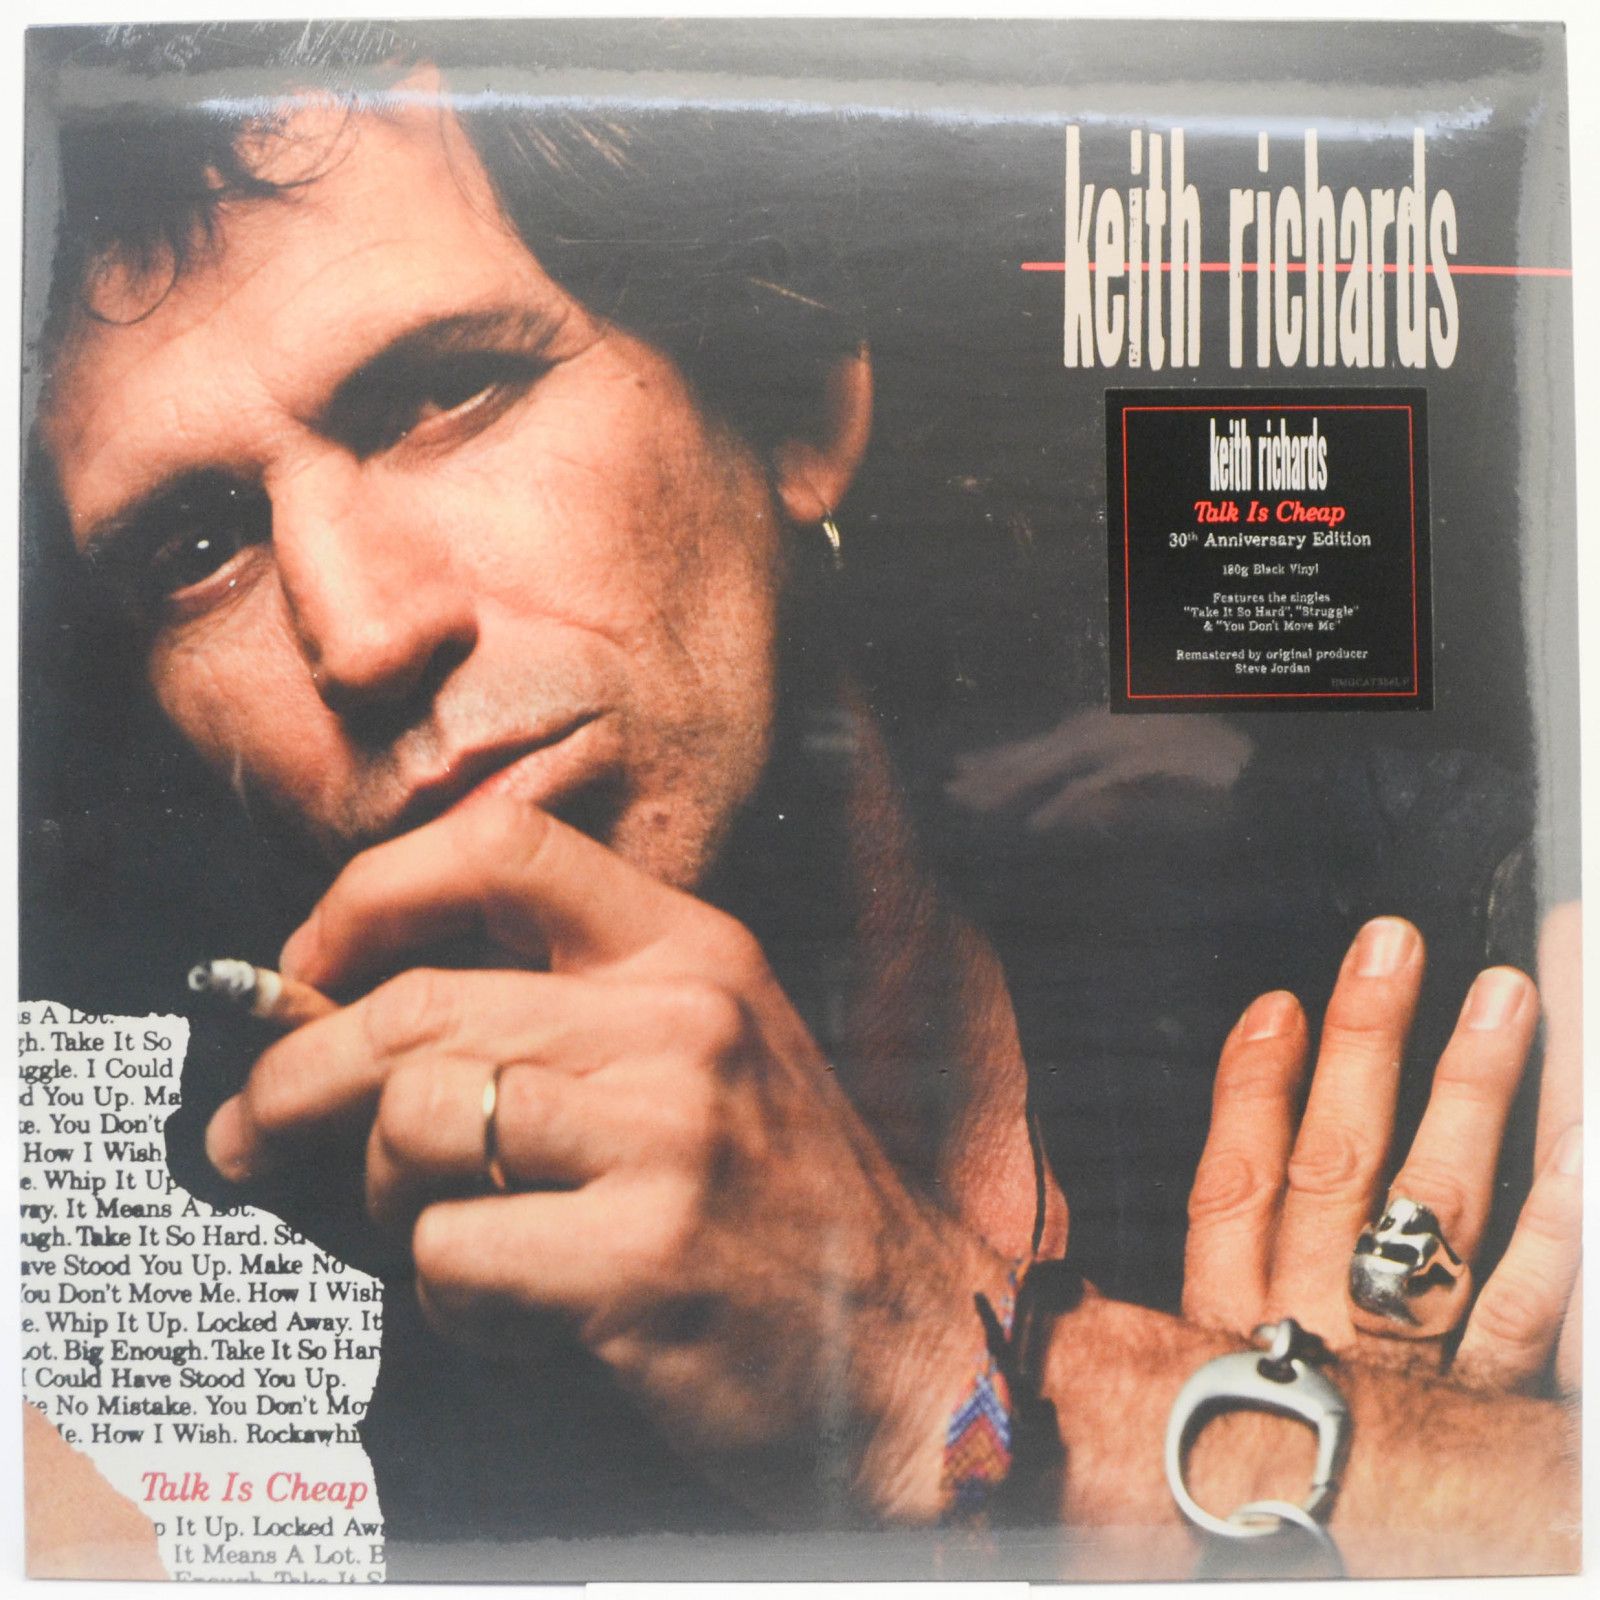 Keith Richards — Talk Is Cheap, 1988